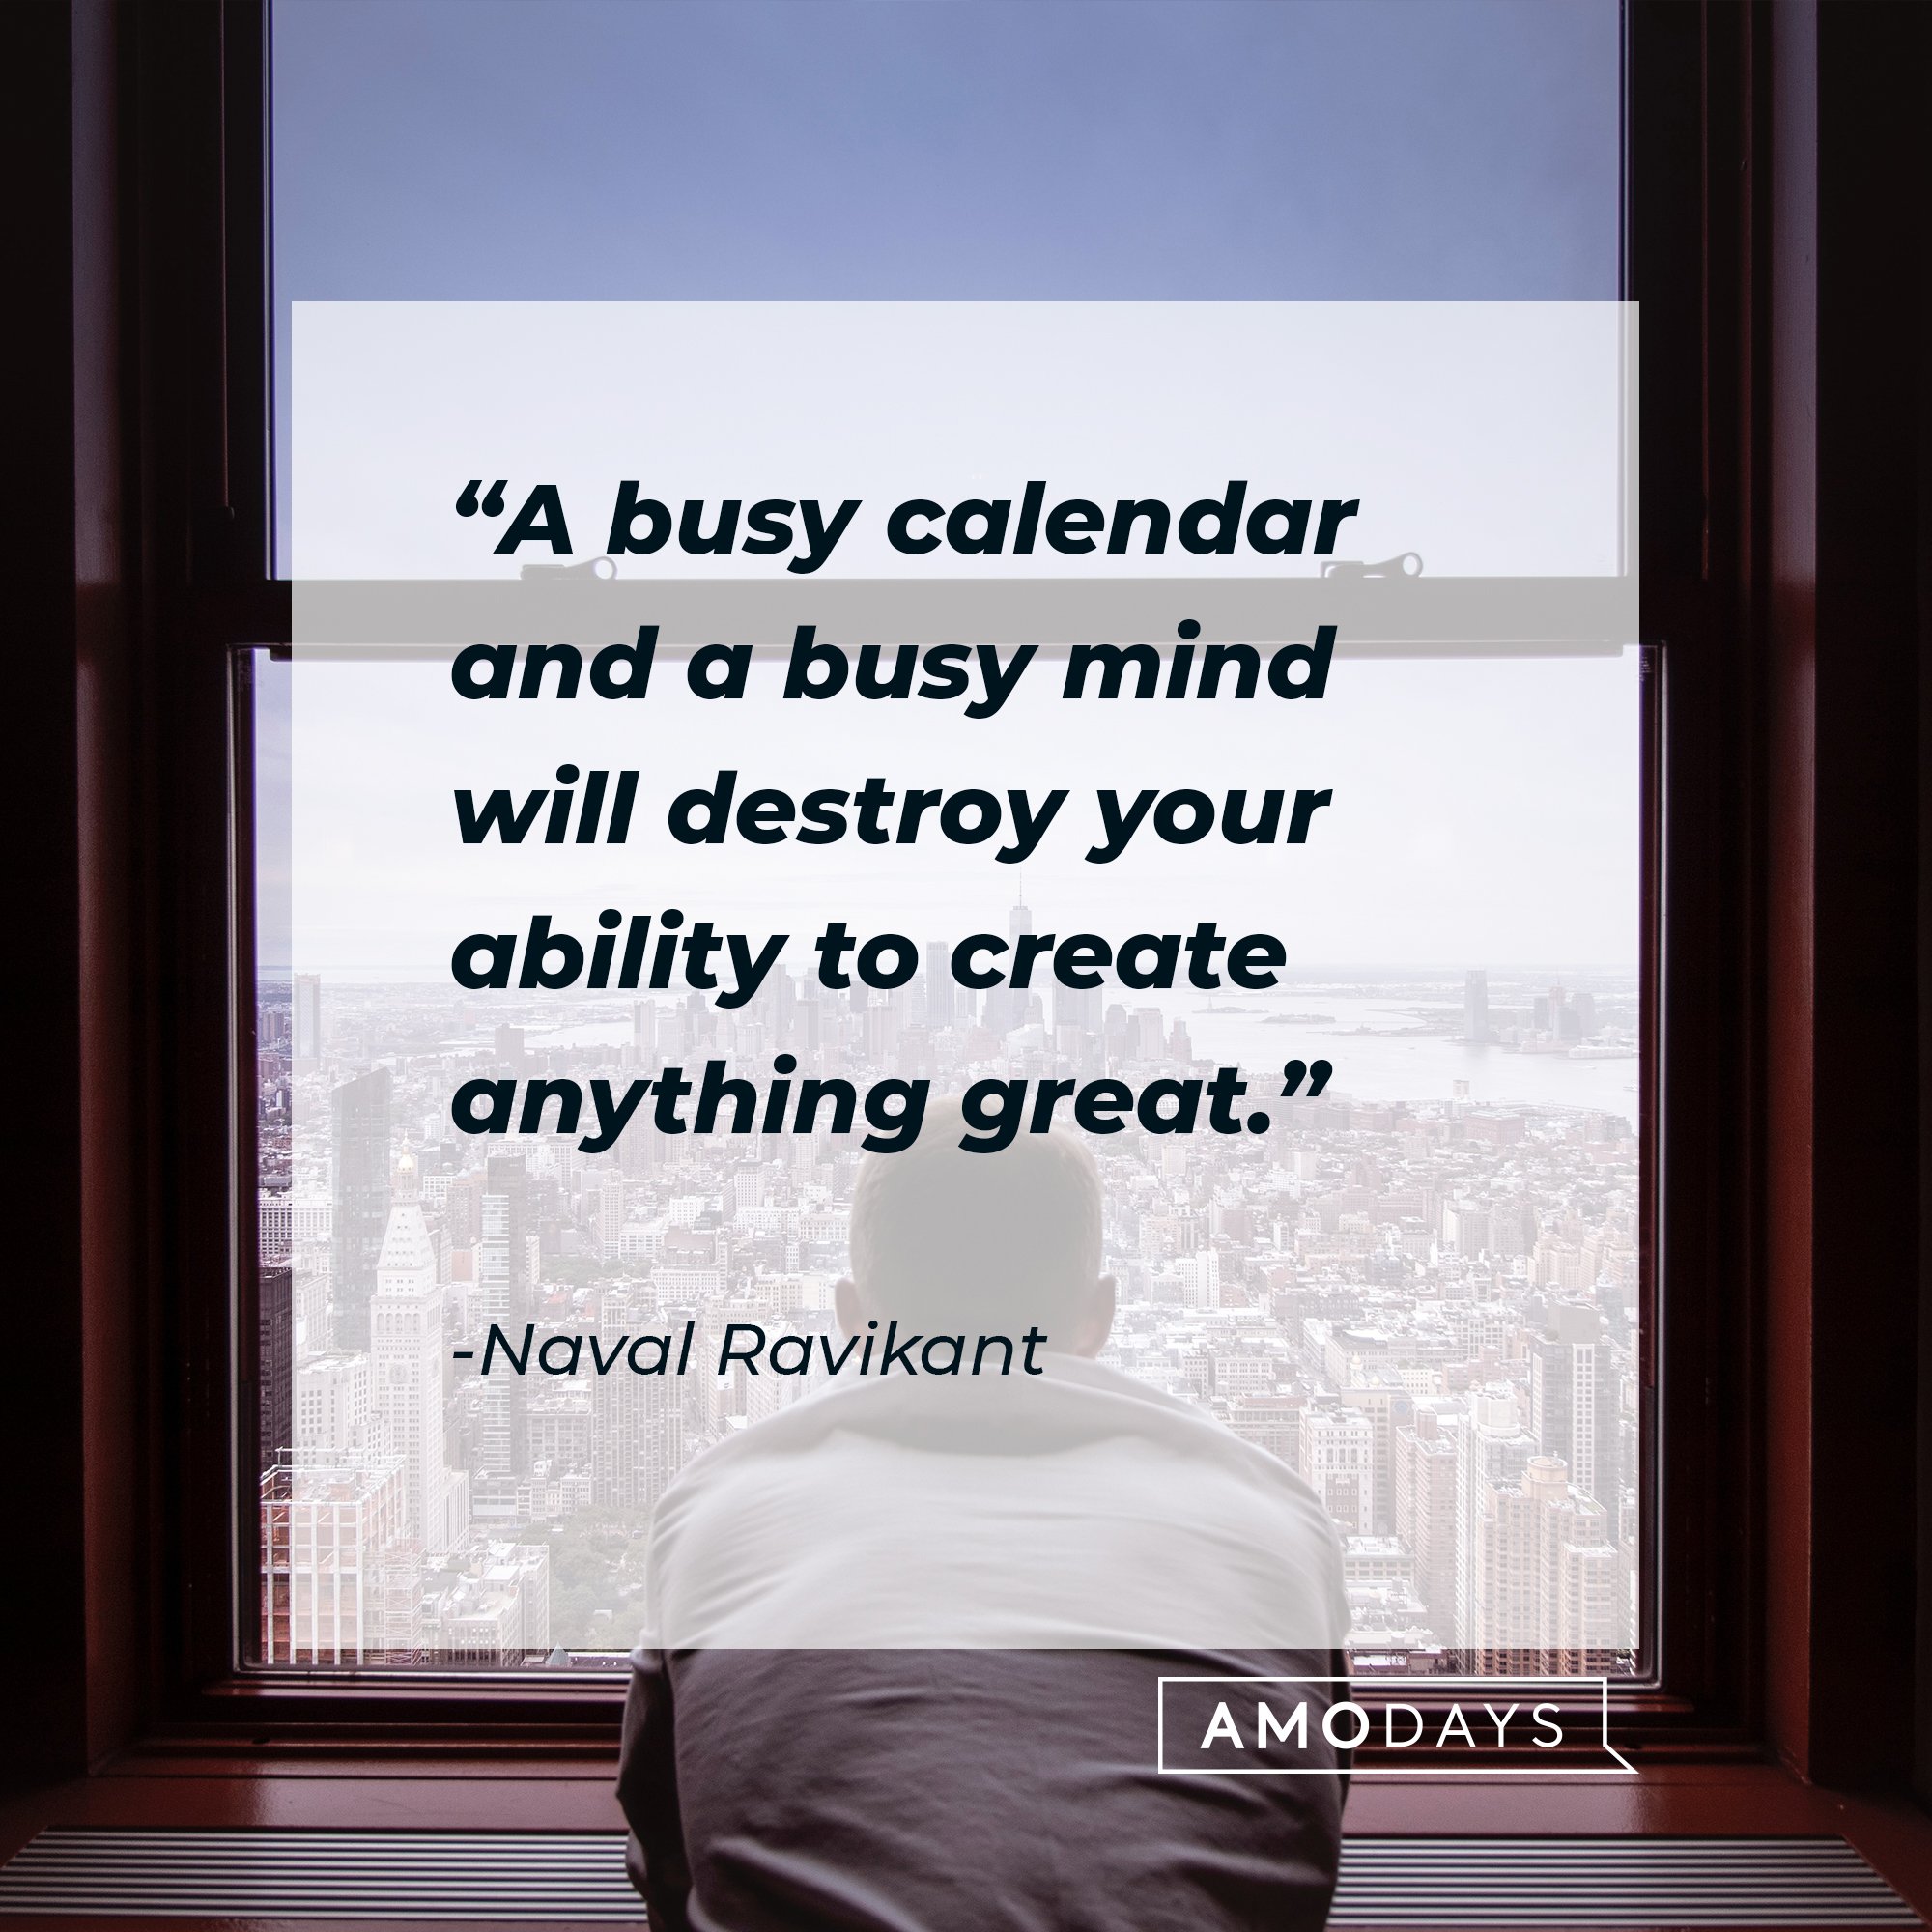 Naval Ravikant's quote: A busy calendar and a busy mind will destroy your ability to create anything great. | Image: AmoDays